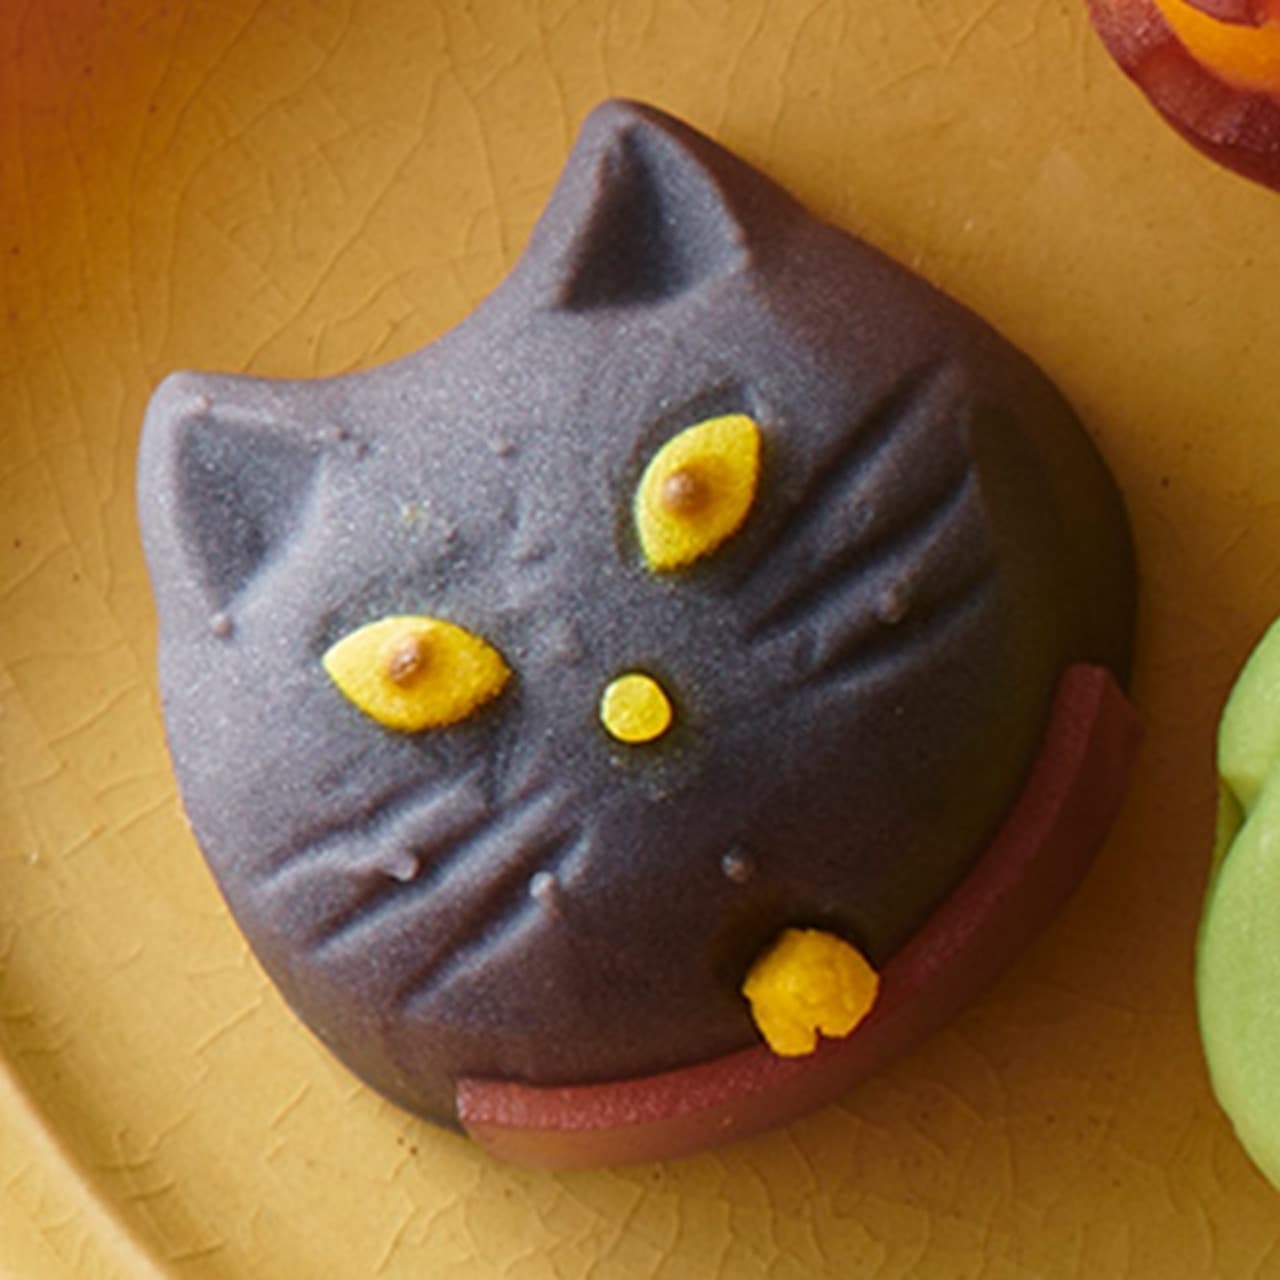 Chateraise "Creative Japanese Sweets: Halloween Black Cat